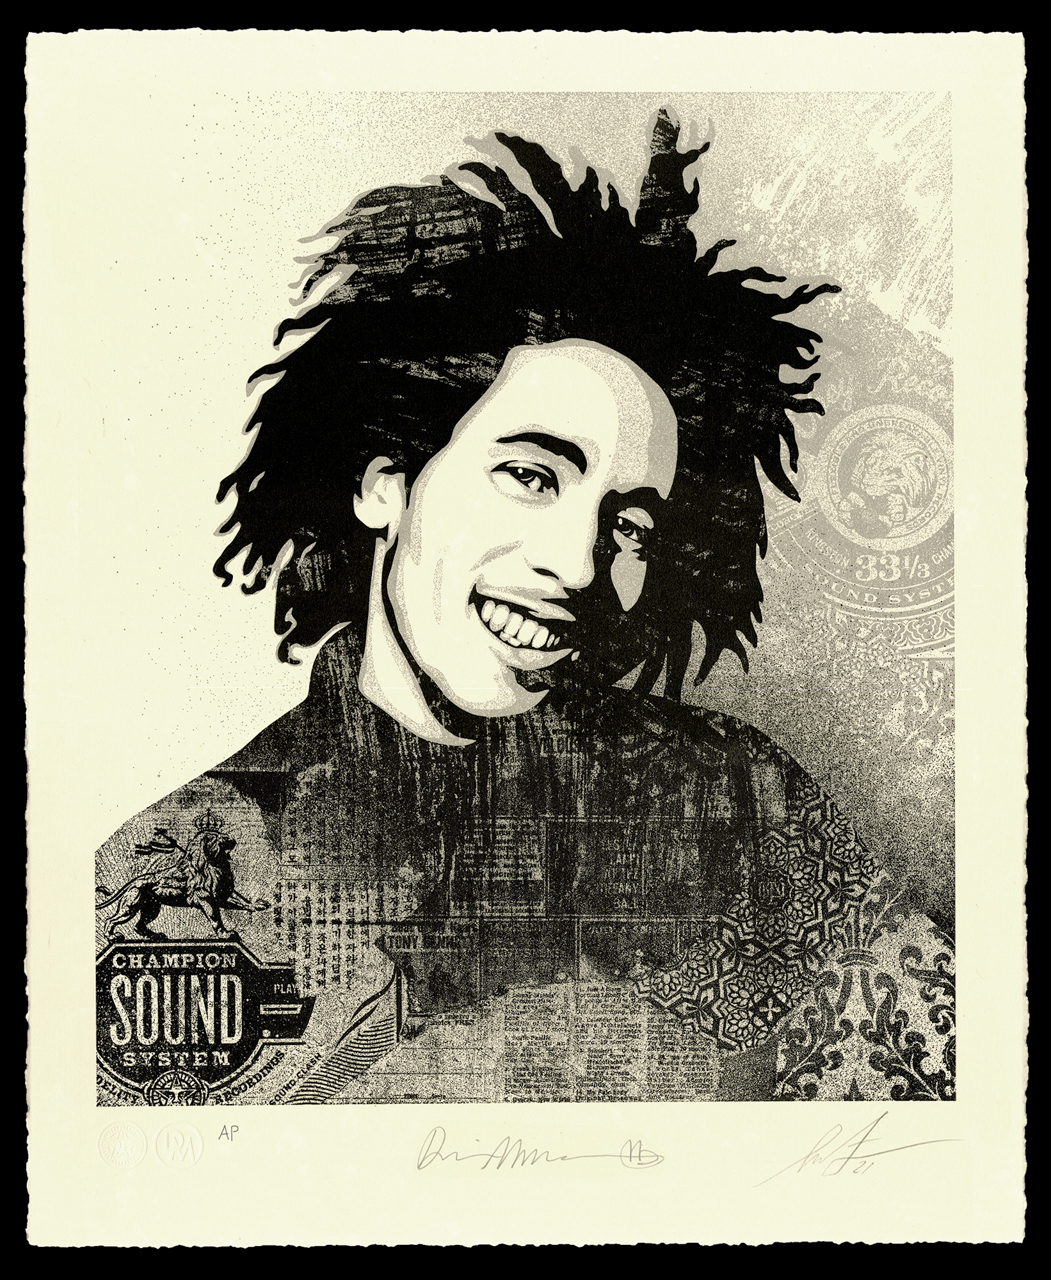 Bob Marley 40th Letterpress - "Lively Up Yourself" - 16 x 19.5 inches